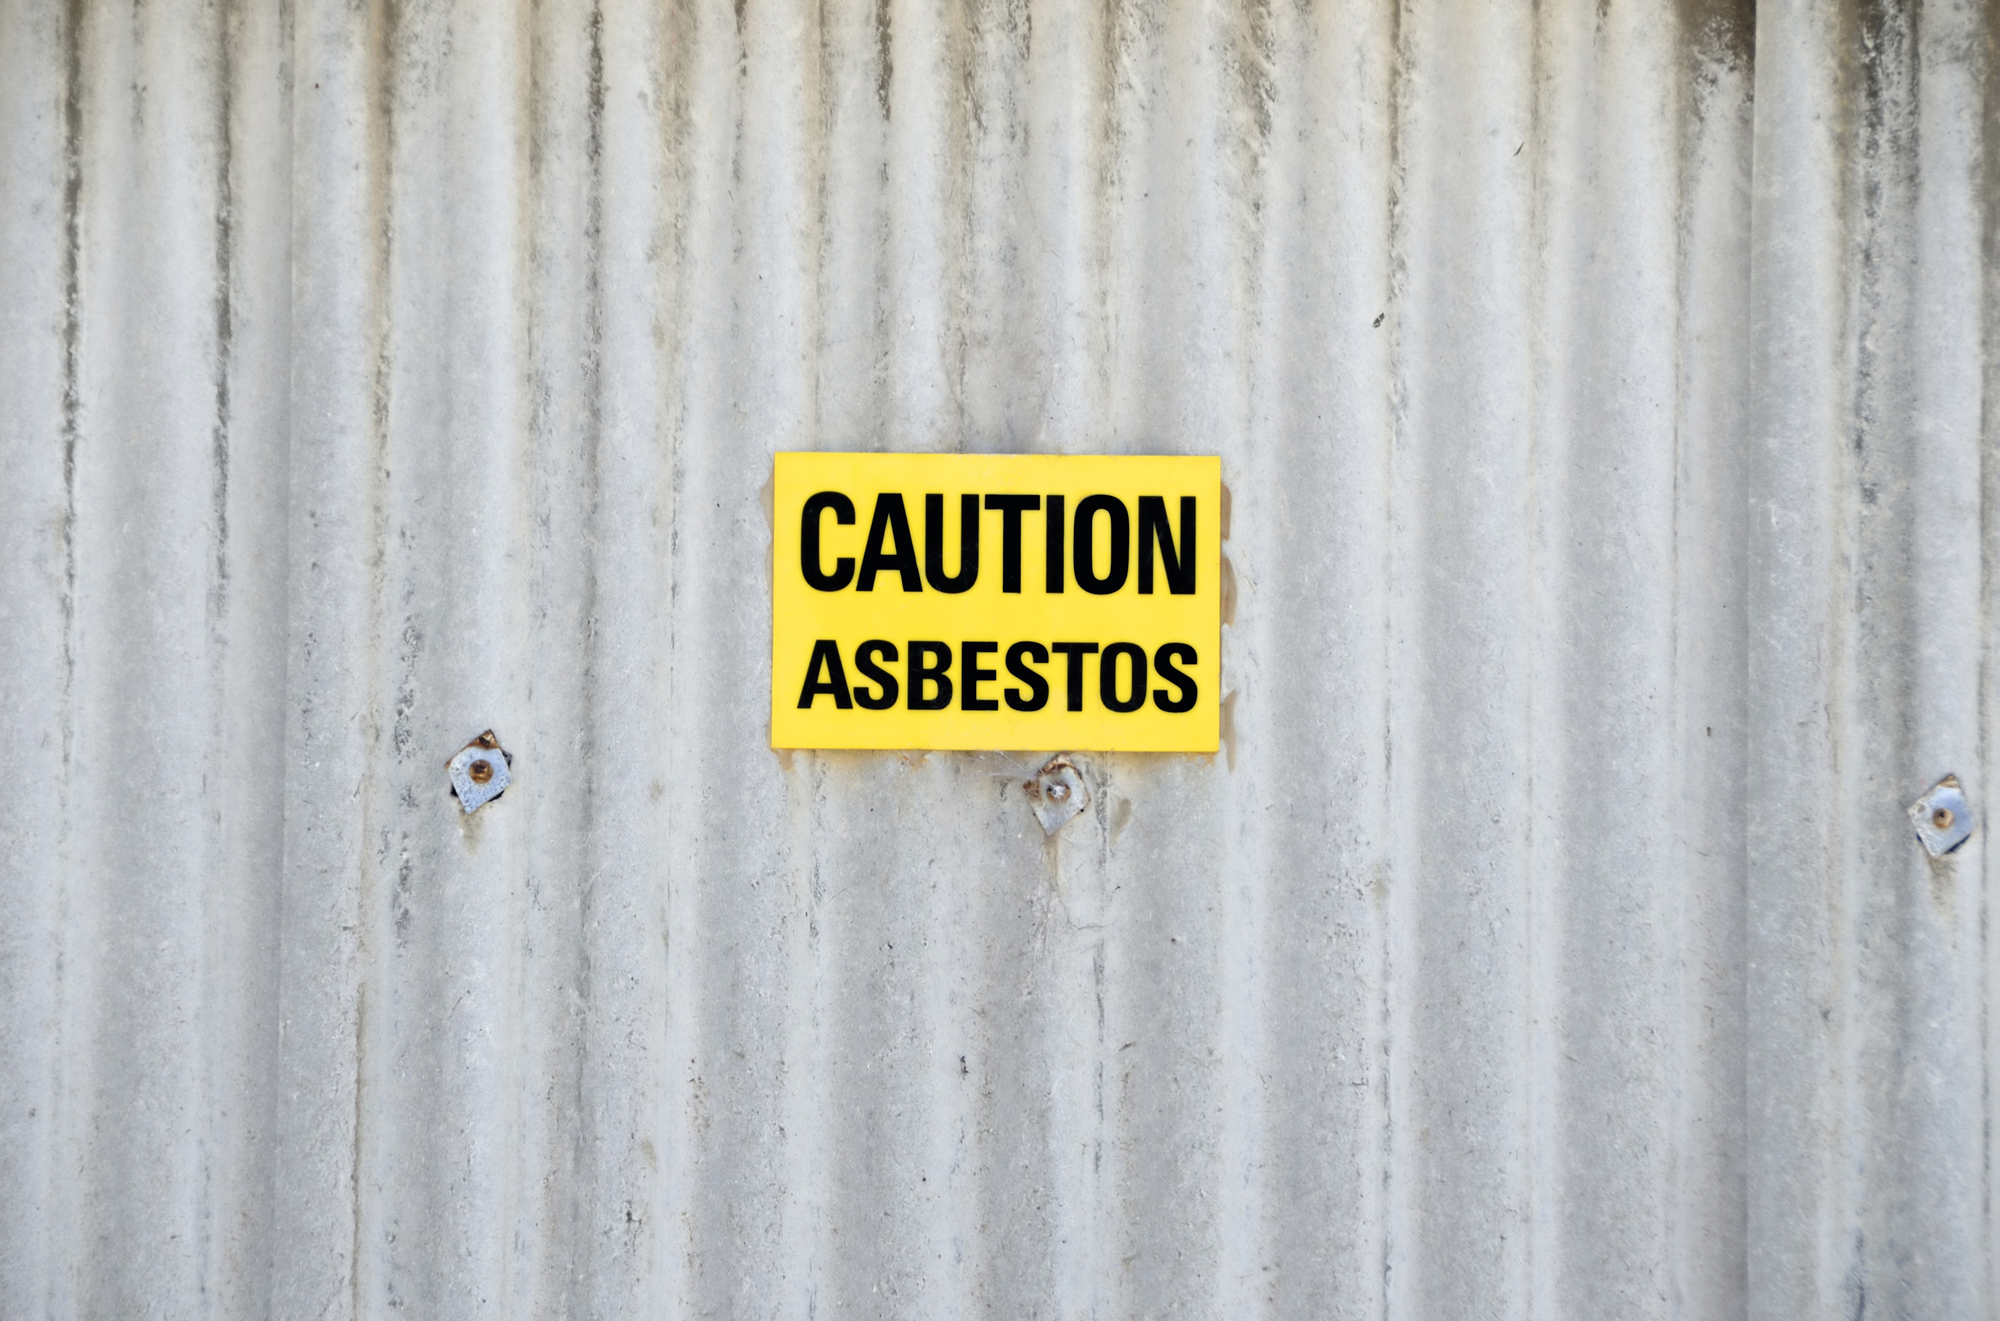 Sign with warning for asbestos